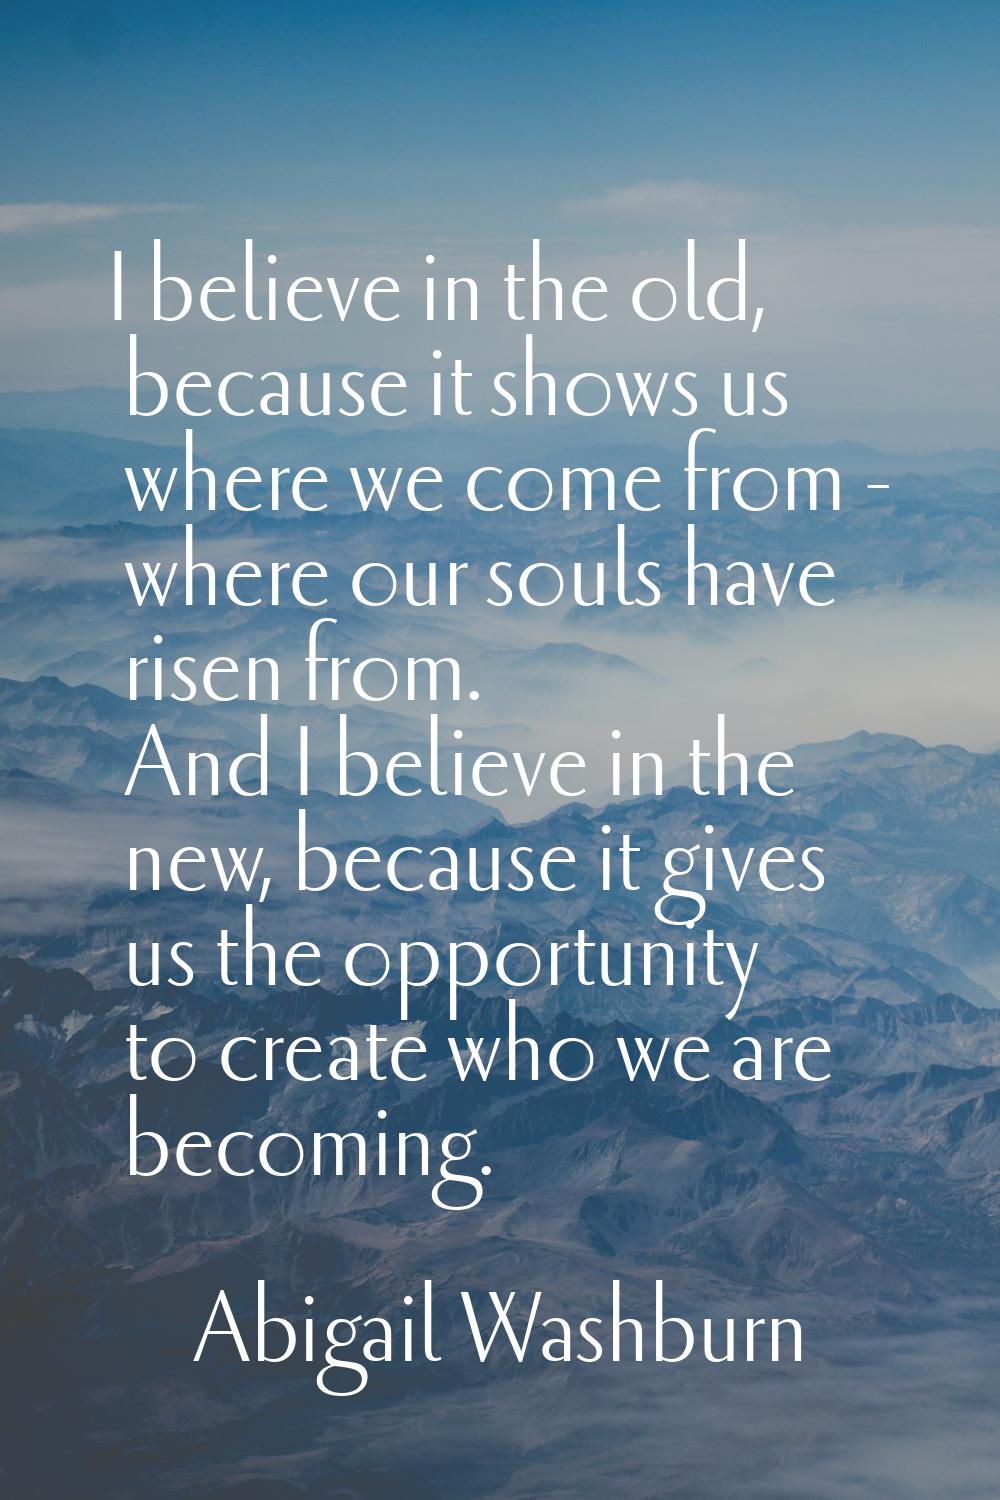 I believe in the old, because it shows us where we come from - where our souls have risen from. And